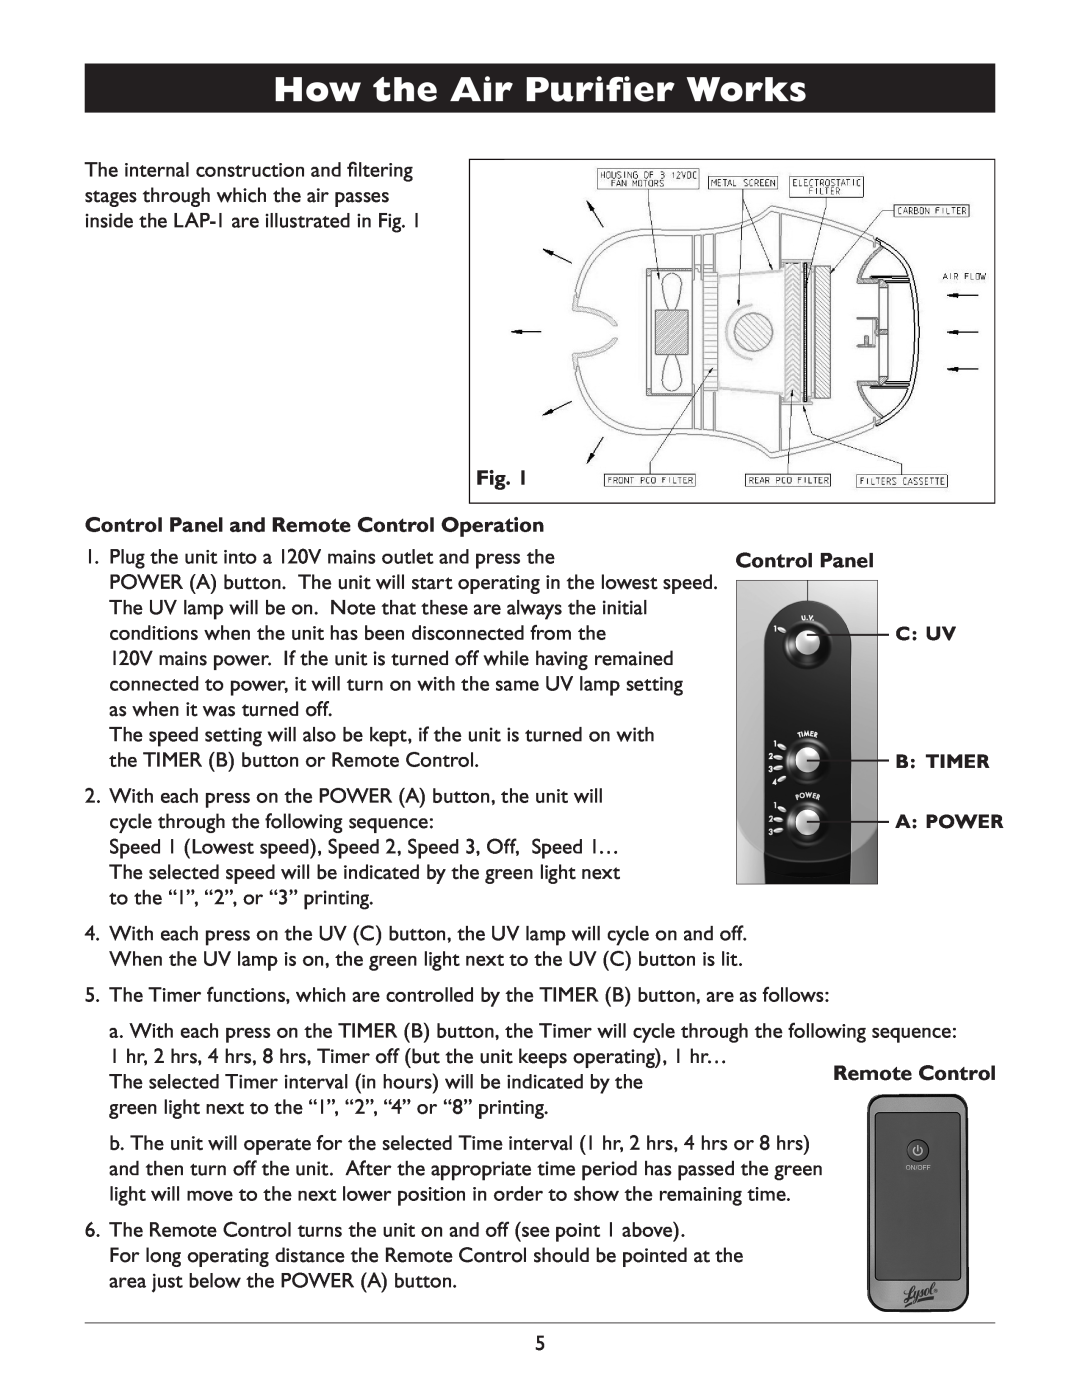 Amcor LAP-1 owner manual How the Air Purifier Works, Control Panel and Remote Control Operation 